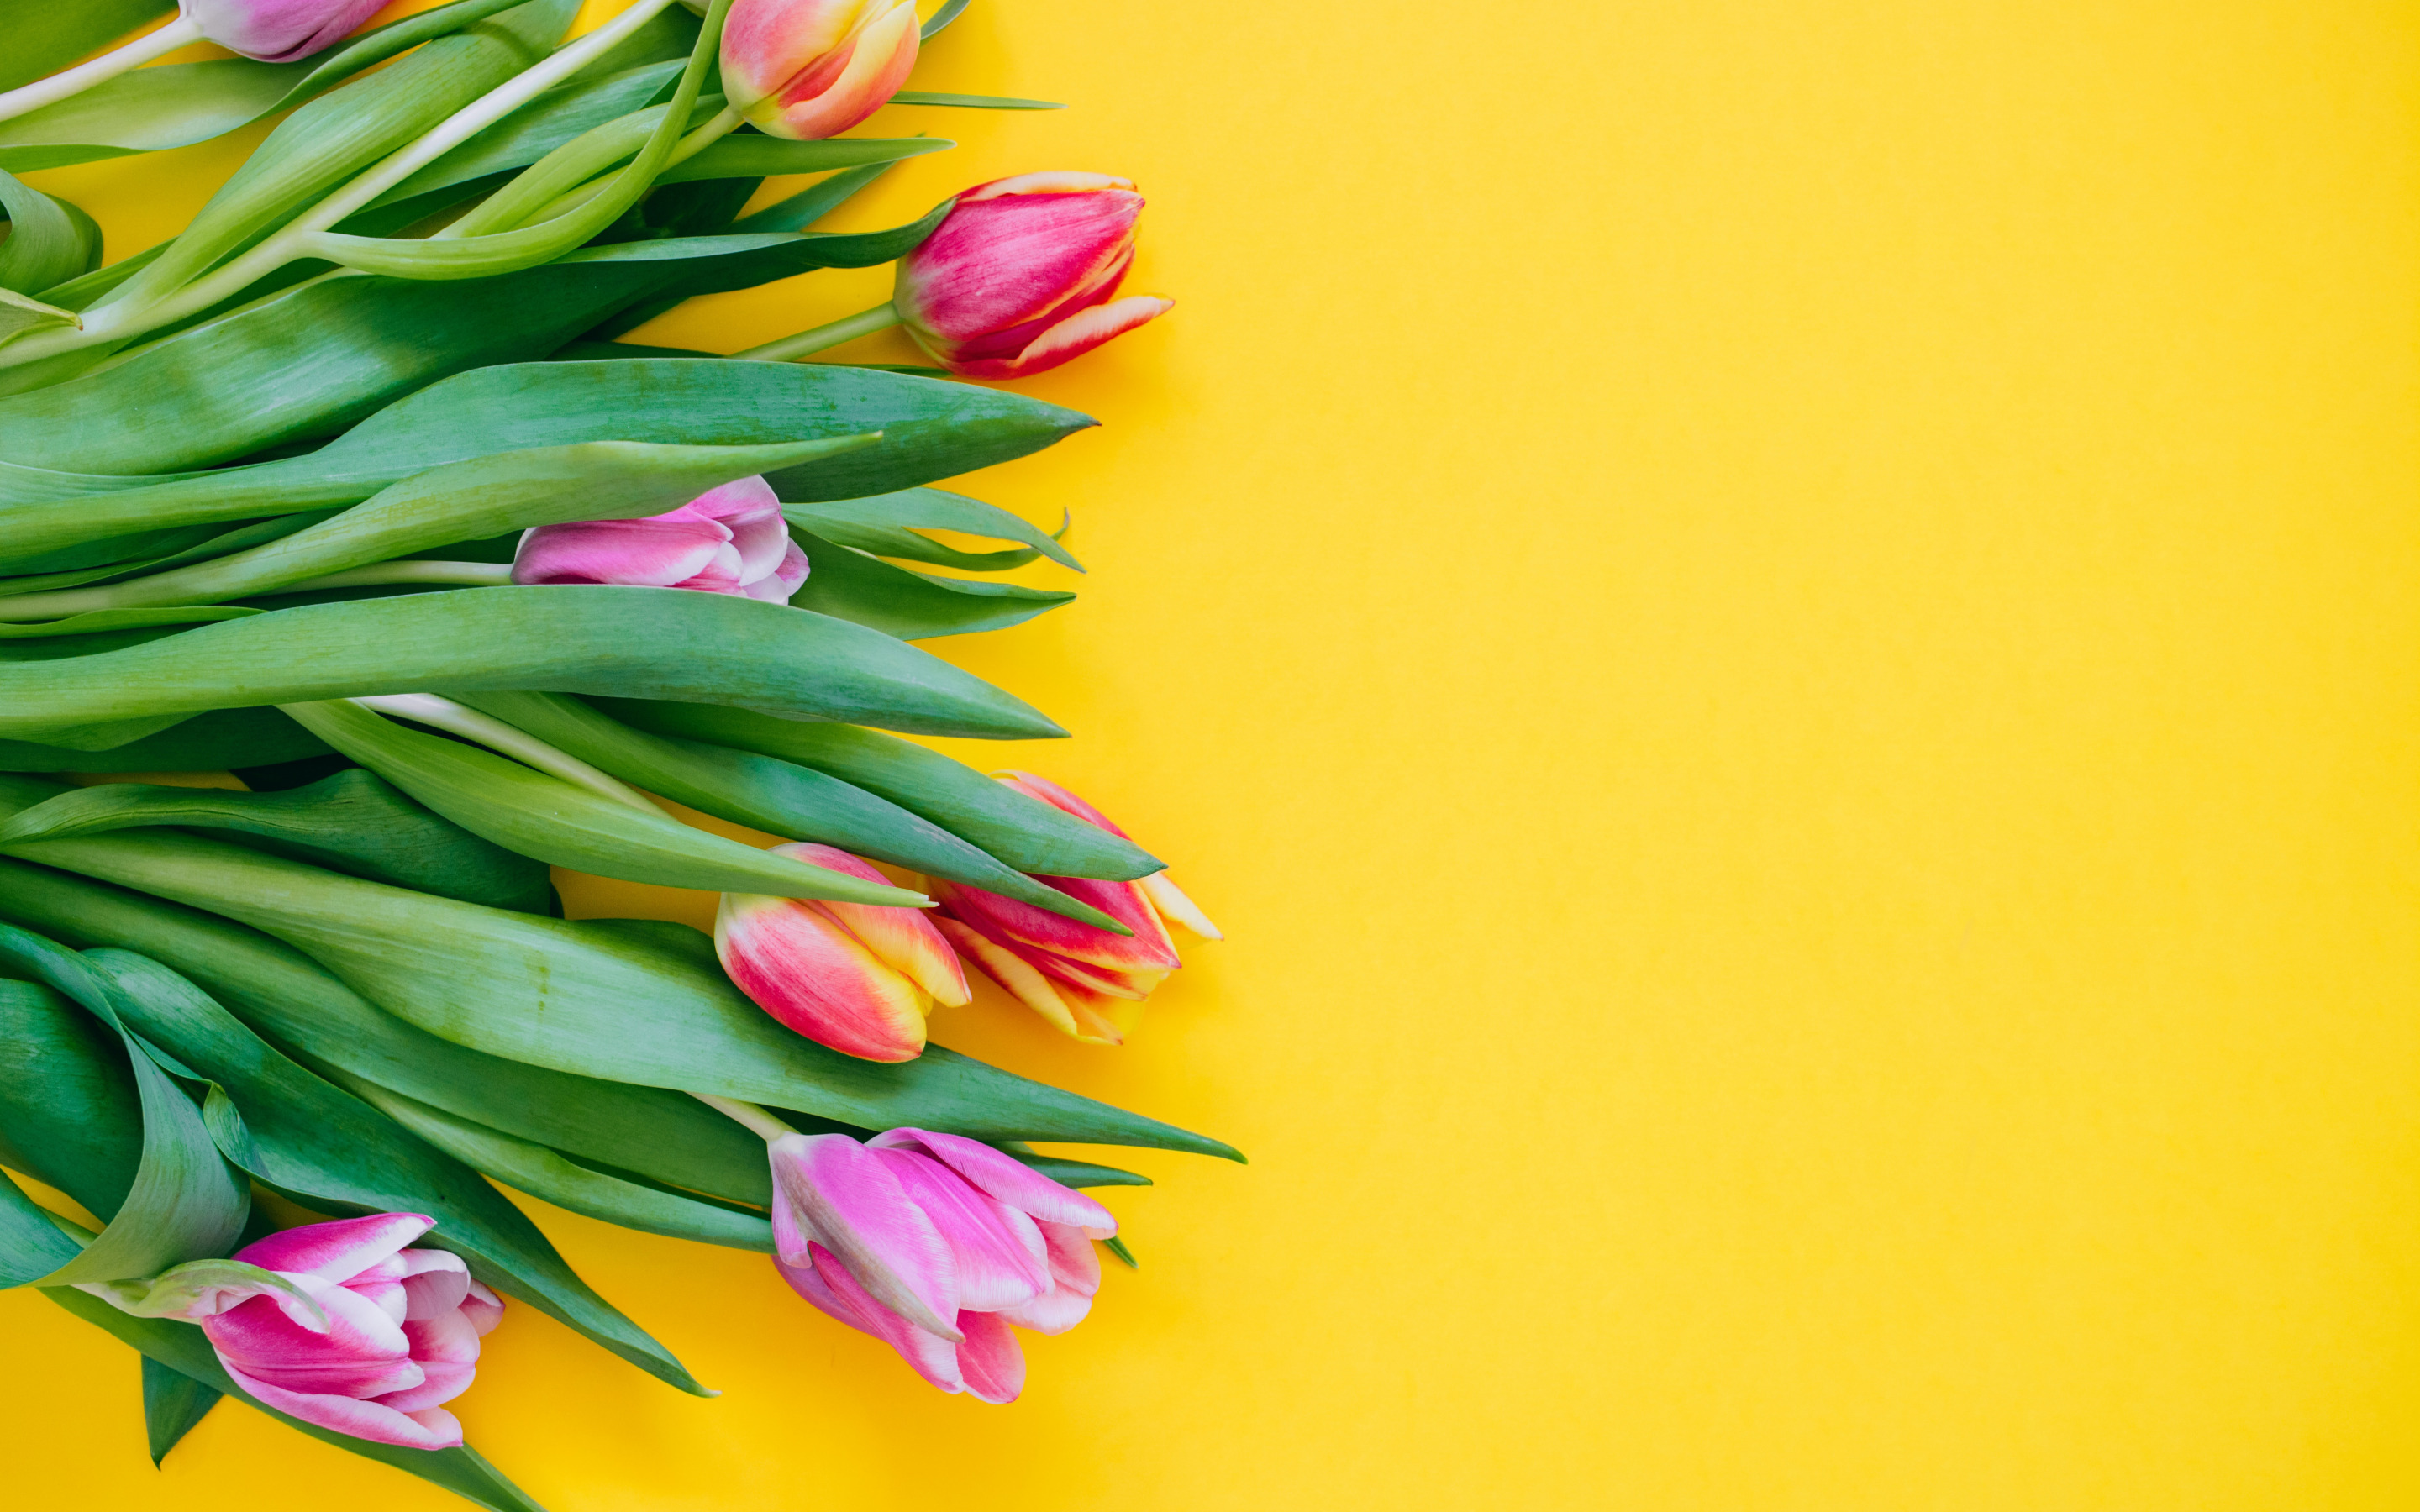 Pink Tulips, Spring Flowers, Tulips On A Yellow Background